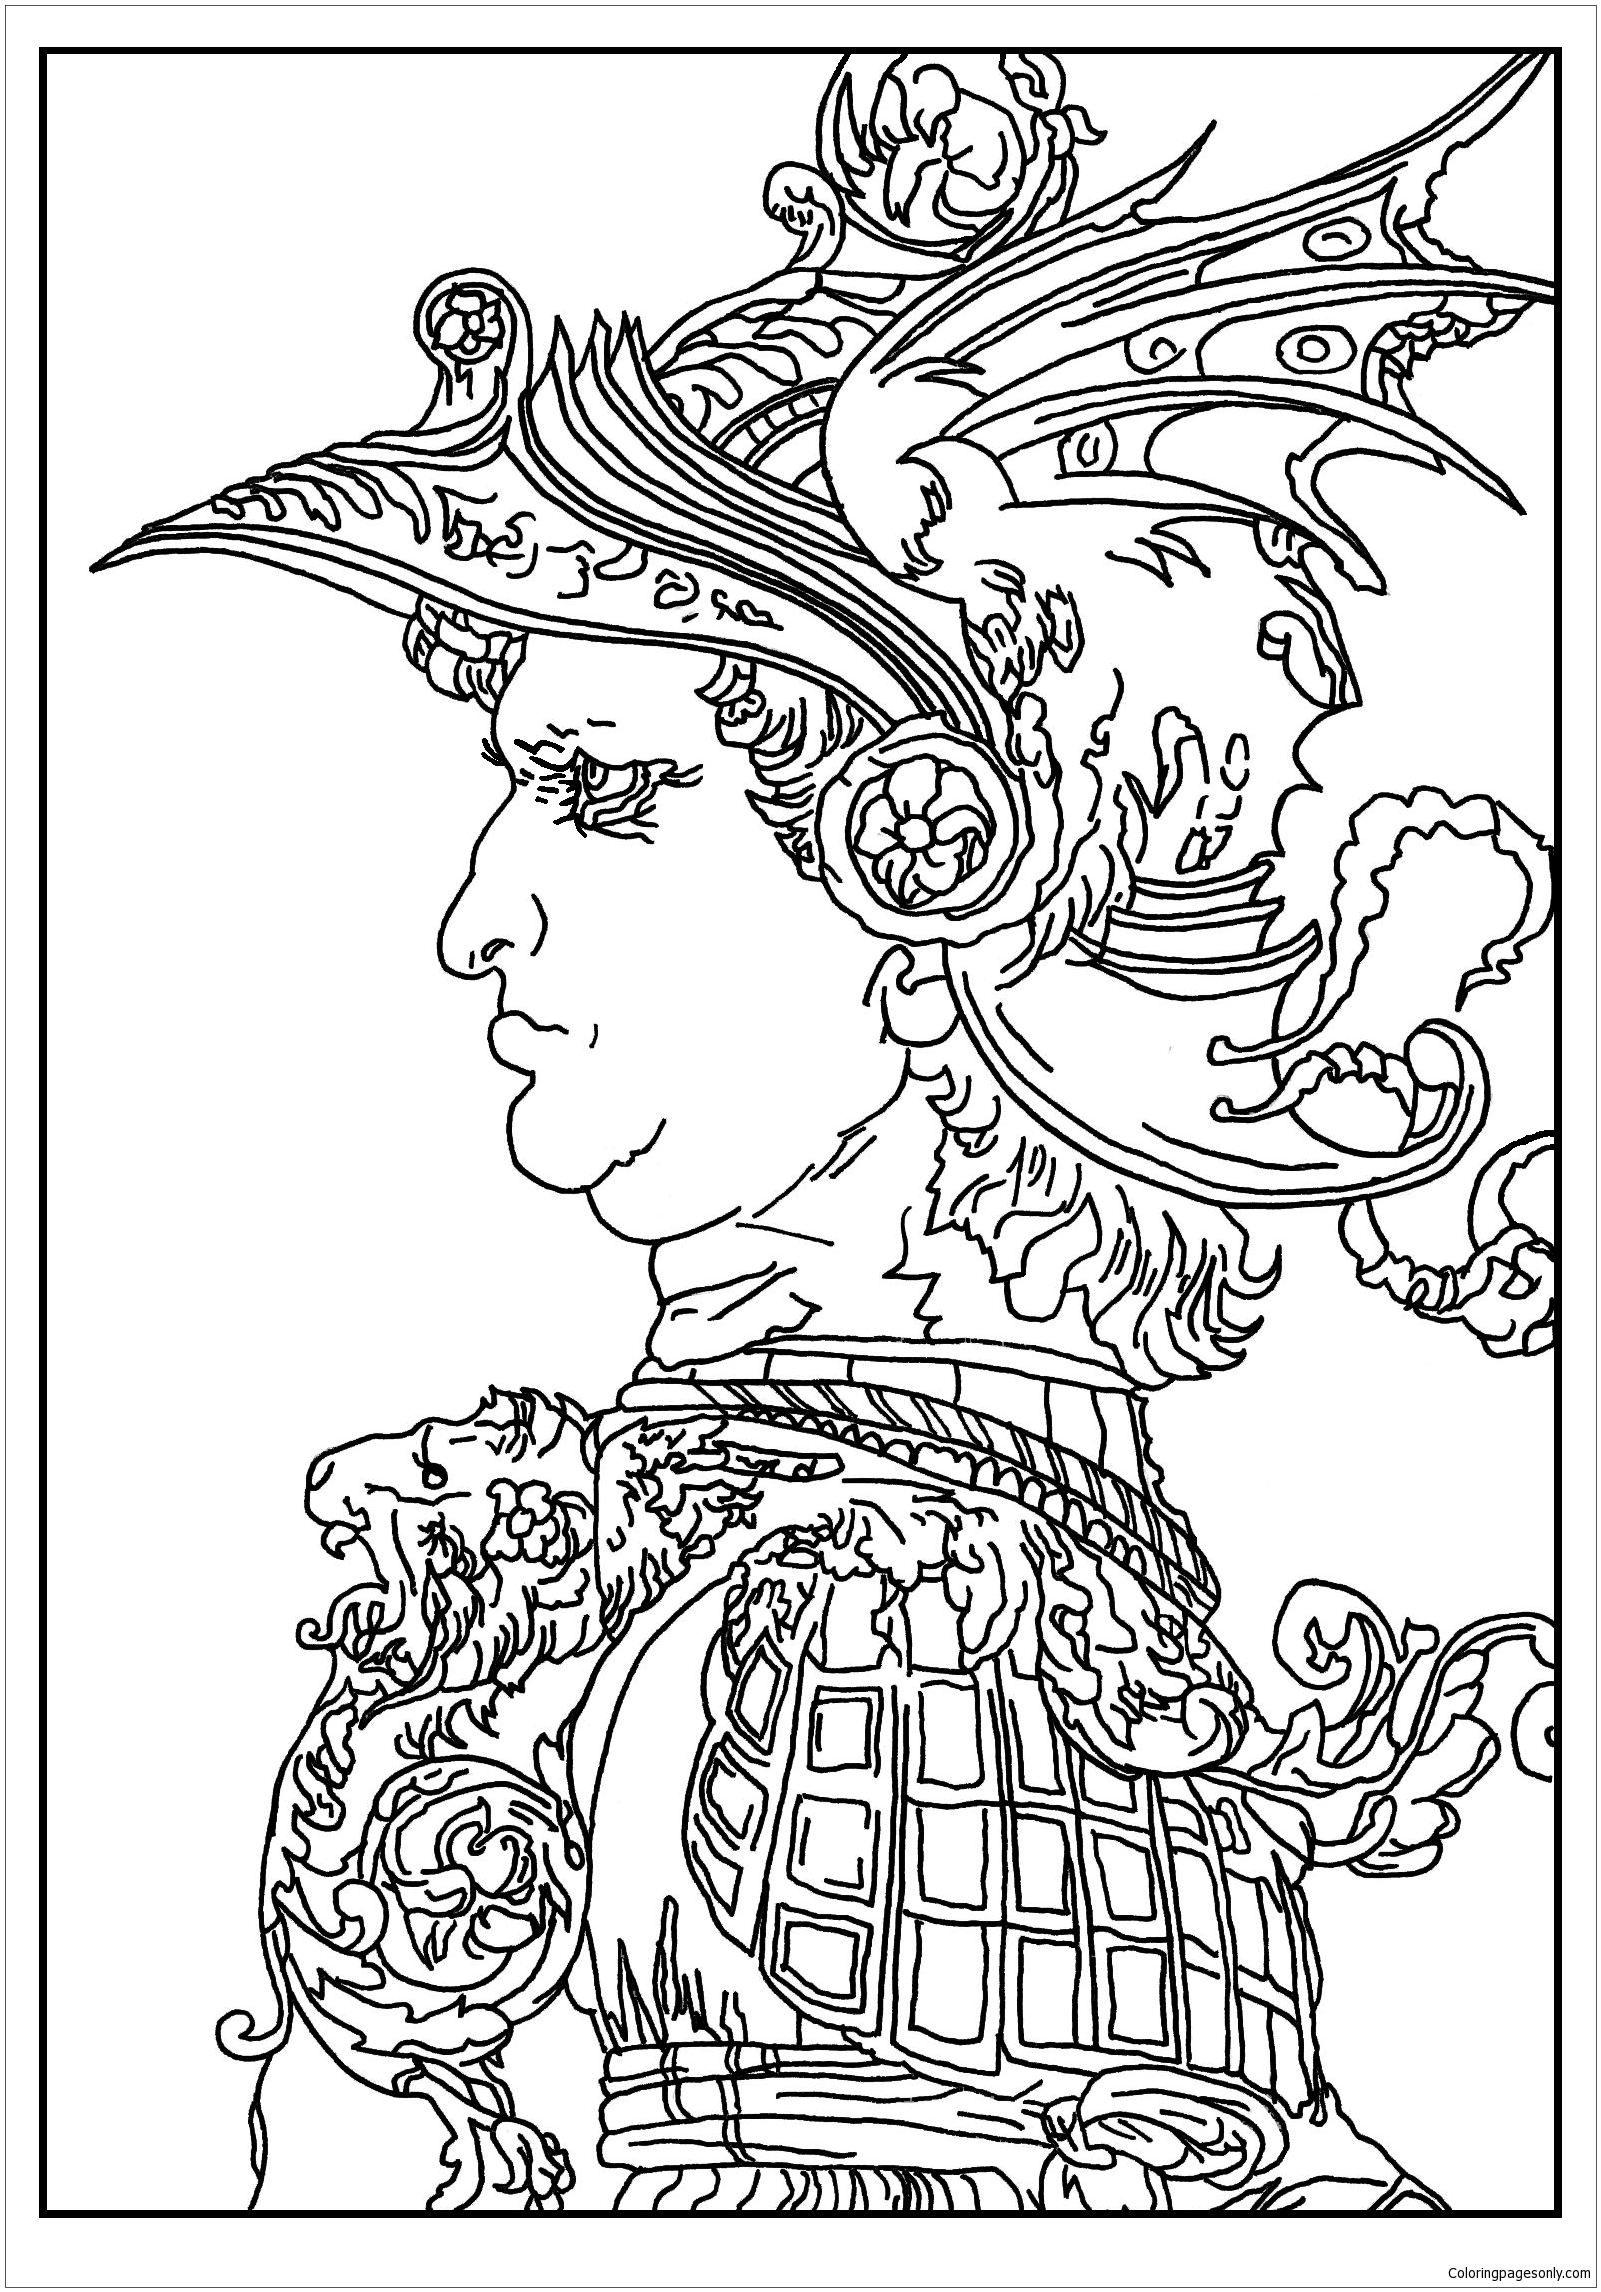 Profile Of A Warrior In Helmet Coloring Pages